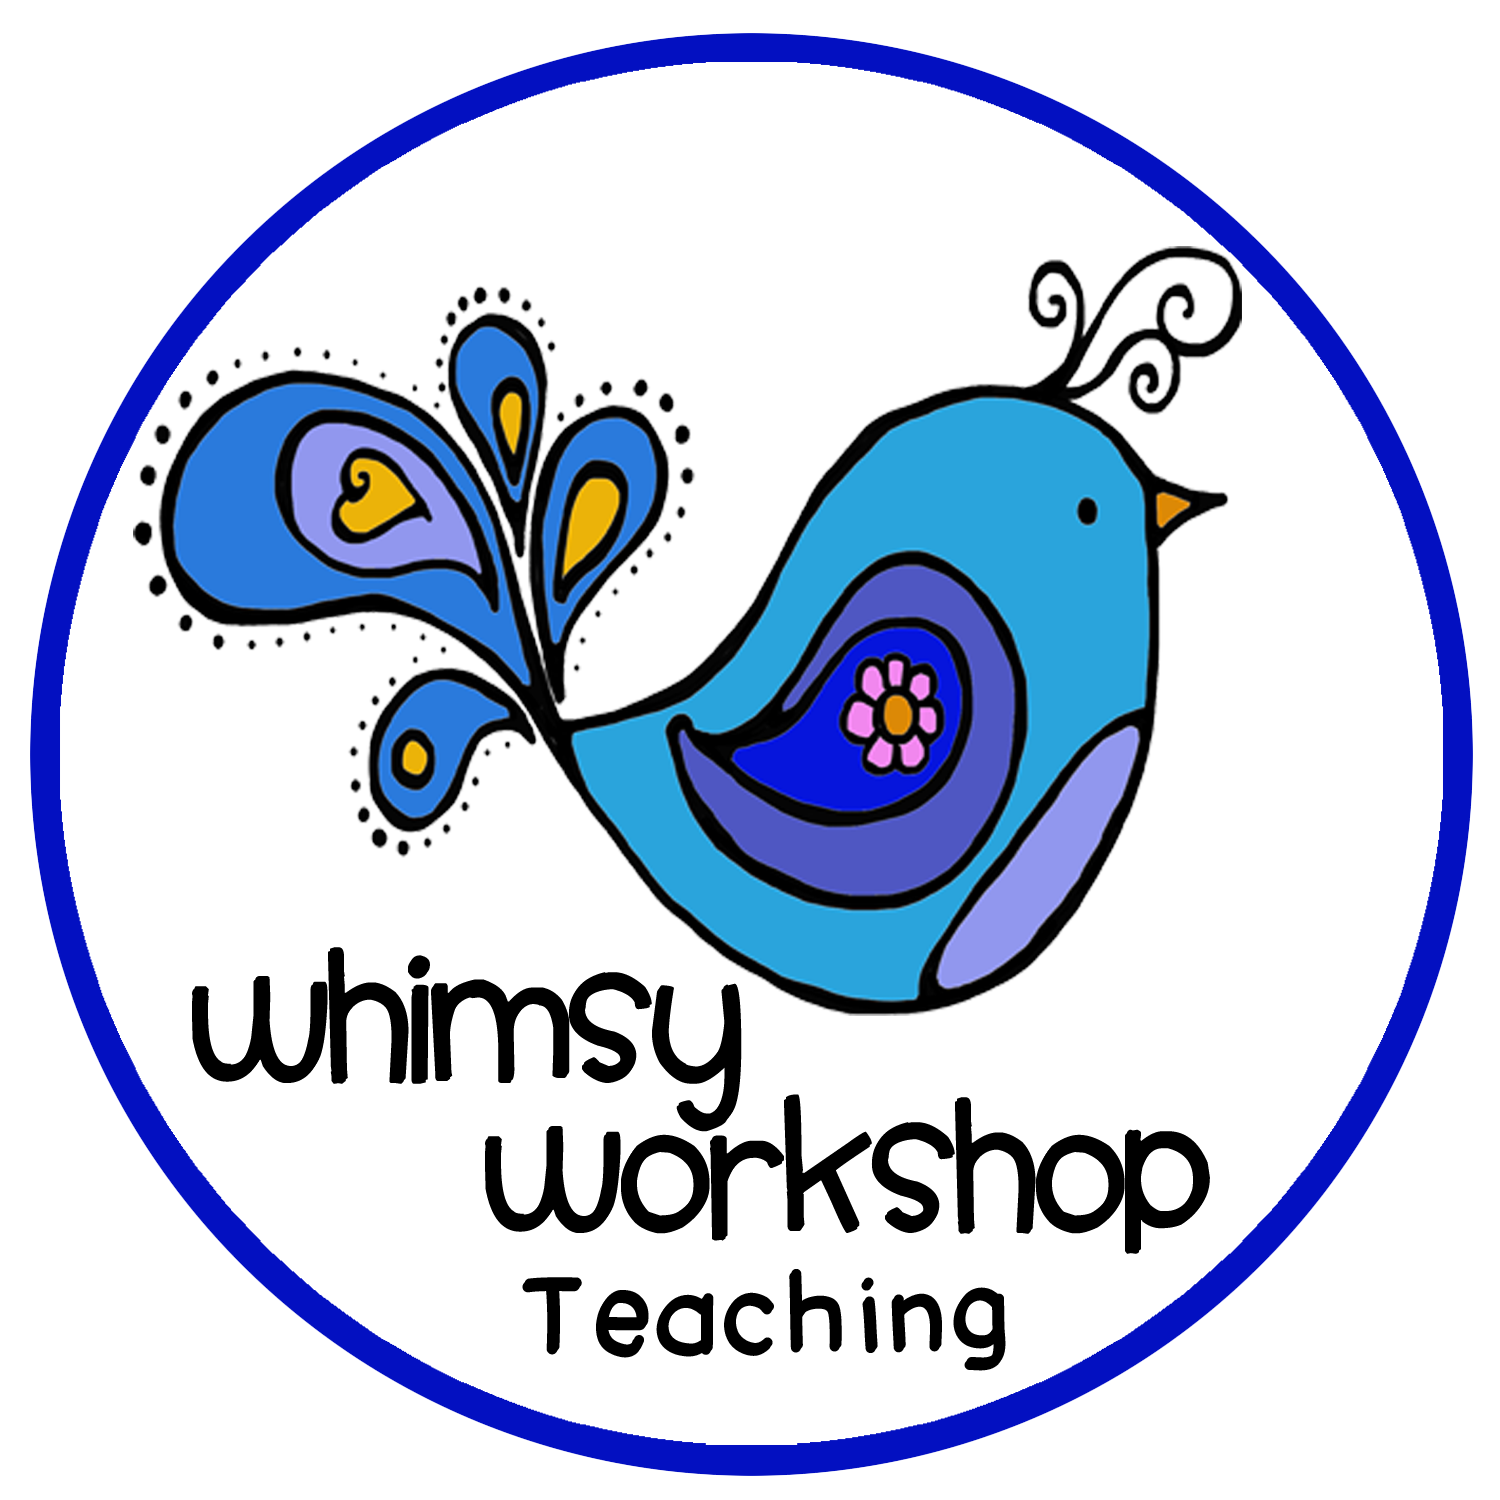 Whimsy Workshop Teaching: Phonics Codes and New Logos